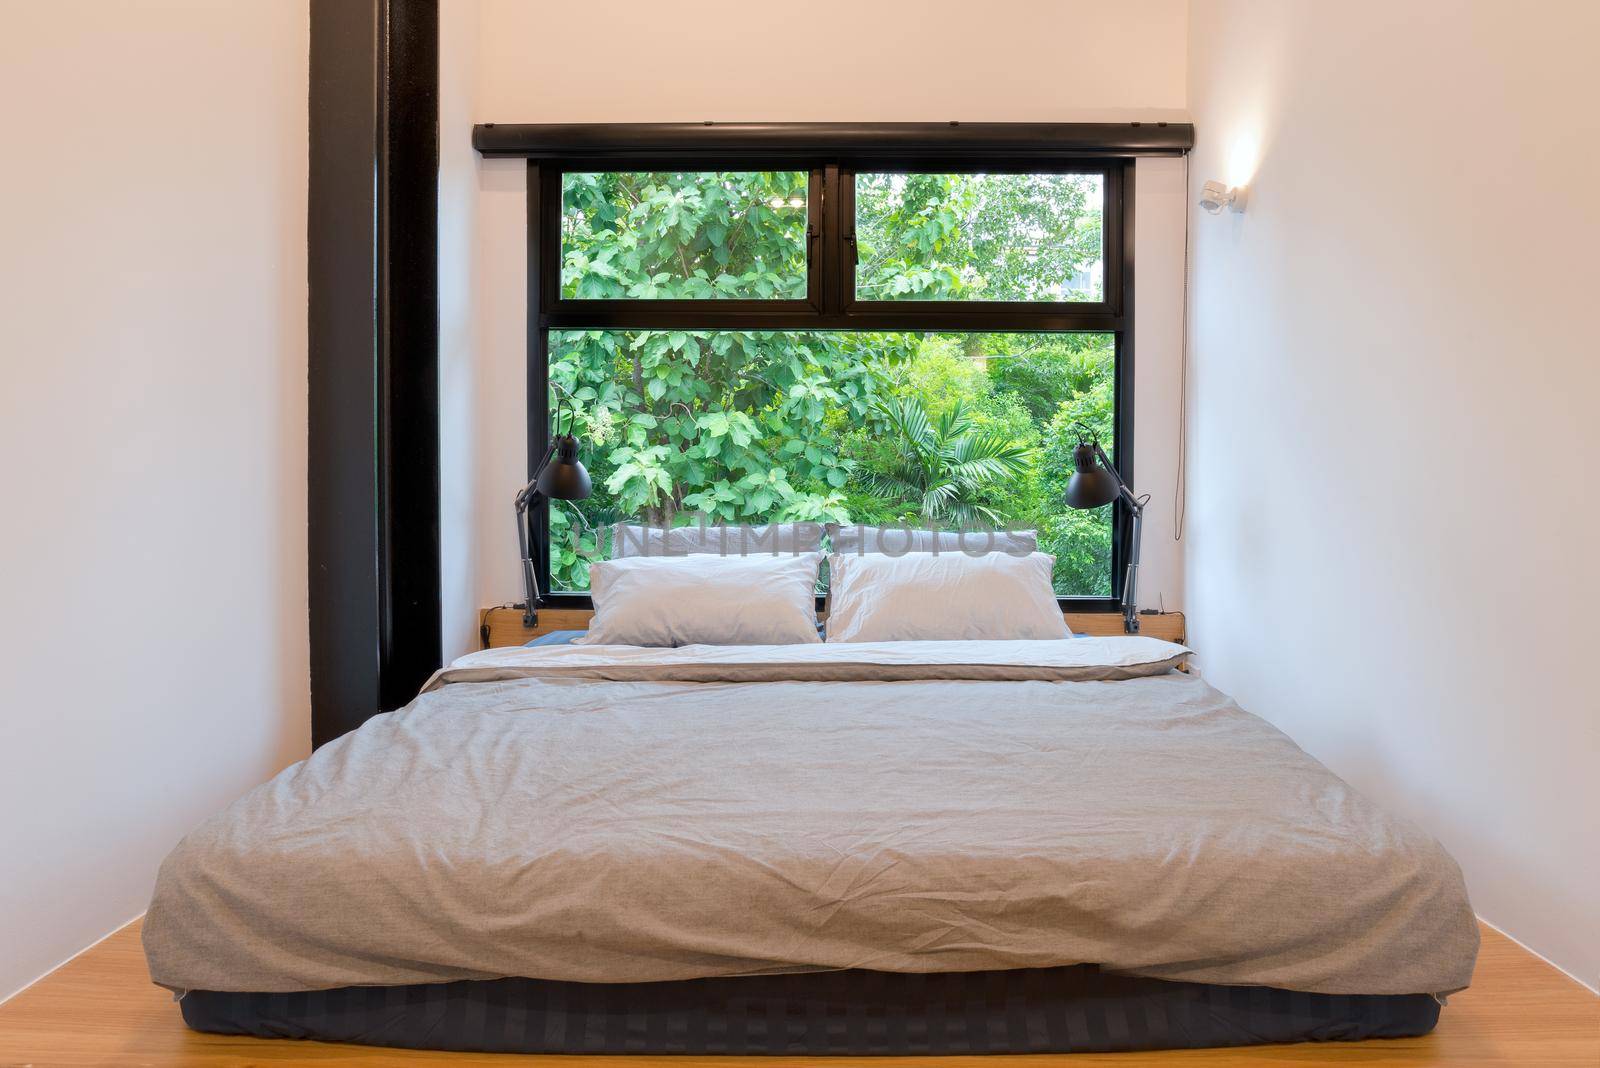 Bedroom with fresh nature green tree view through the window